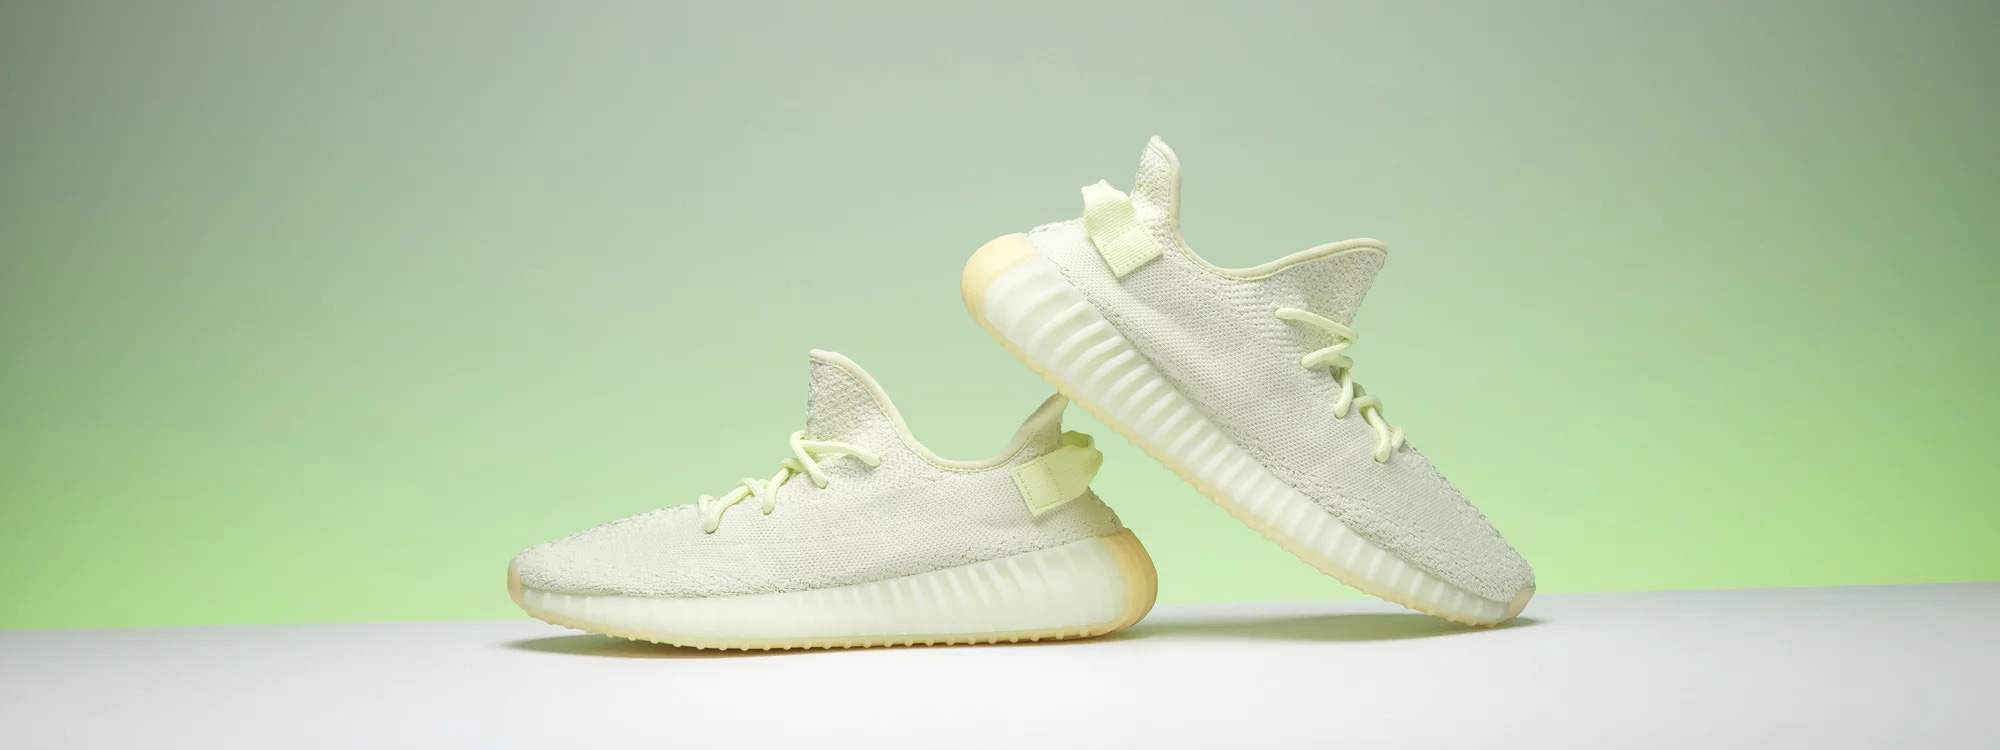 Buy Adidas Yeezy Boost 350 V2 Butter shoes